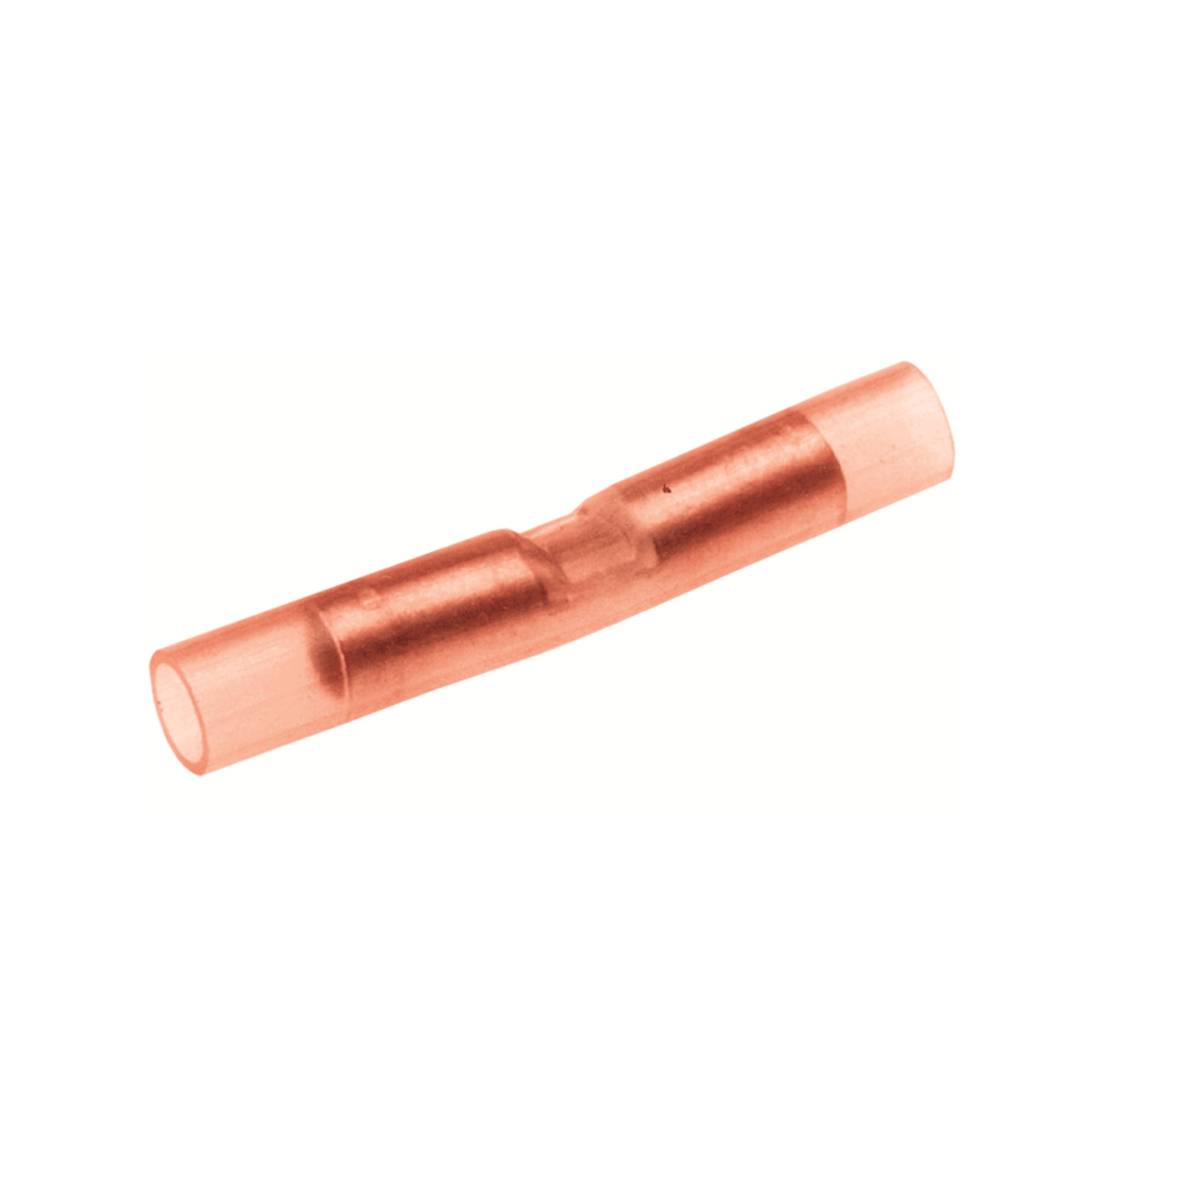 BURNDY® INSULINK™ SN18 Type SN Splice Connector, 22 to 18 AWG Conductor, 1-1/4 in L, Butted Barrel, Copper, Red